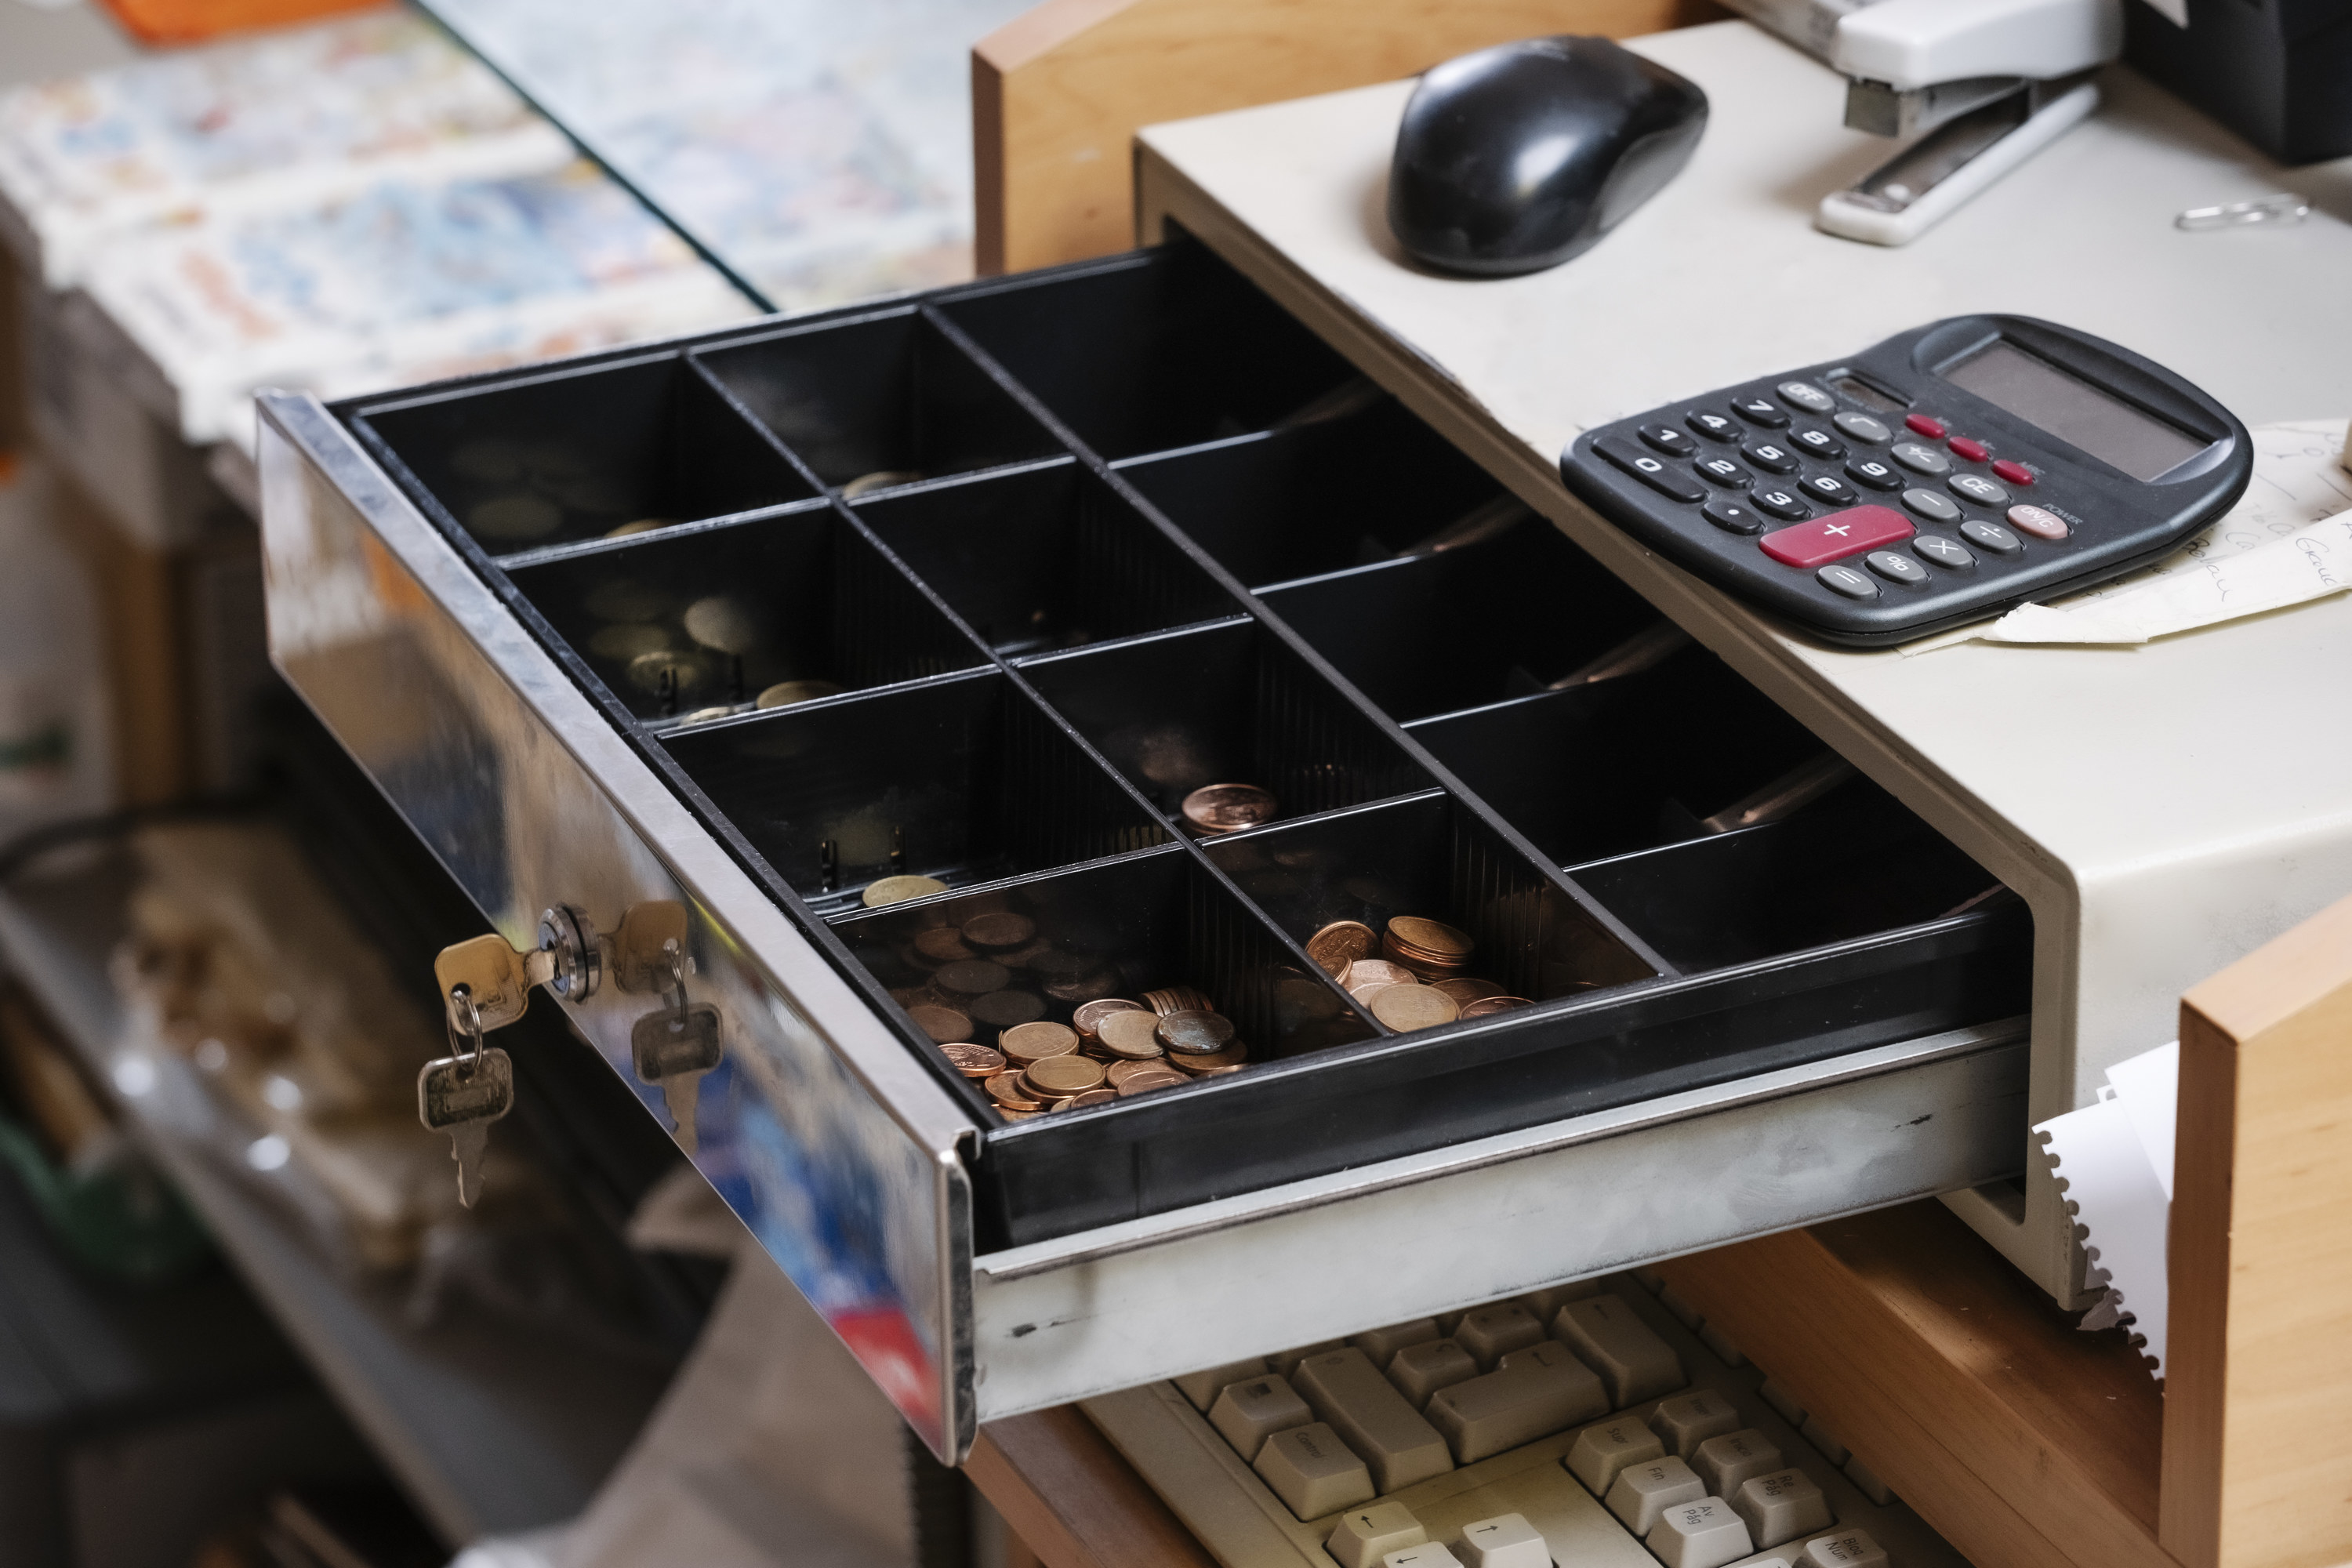 A cash register&#x27;s drawer open showing its money